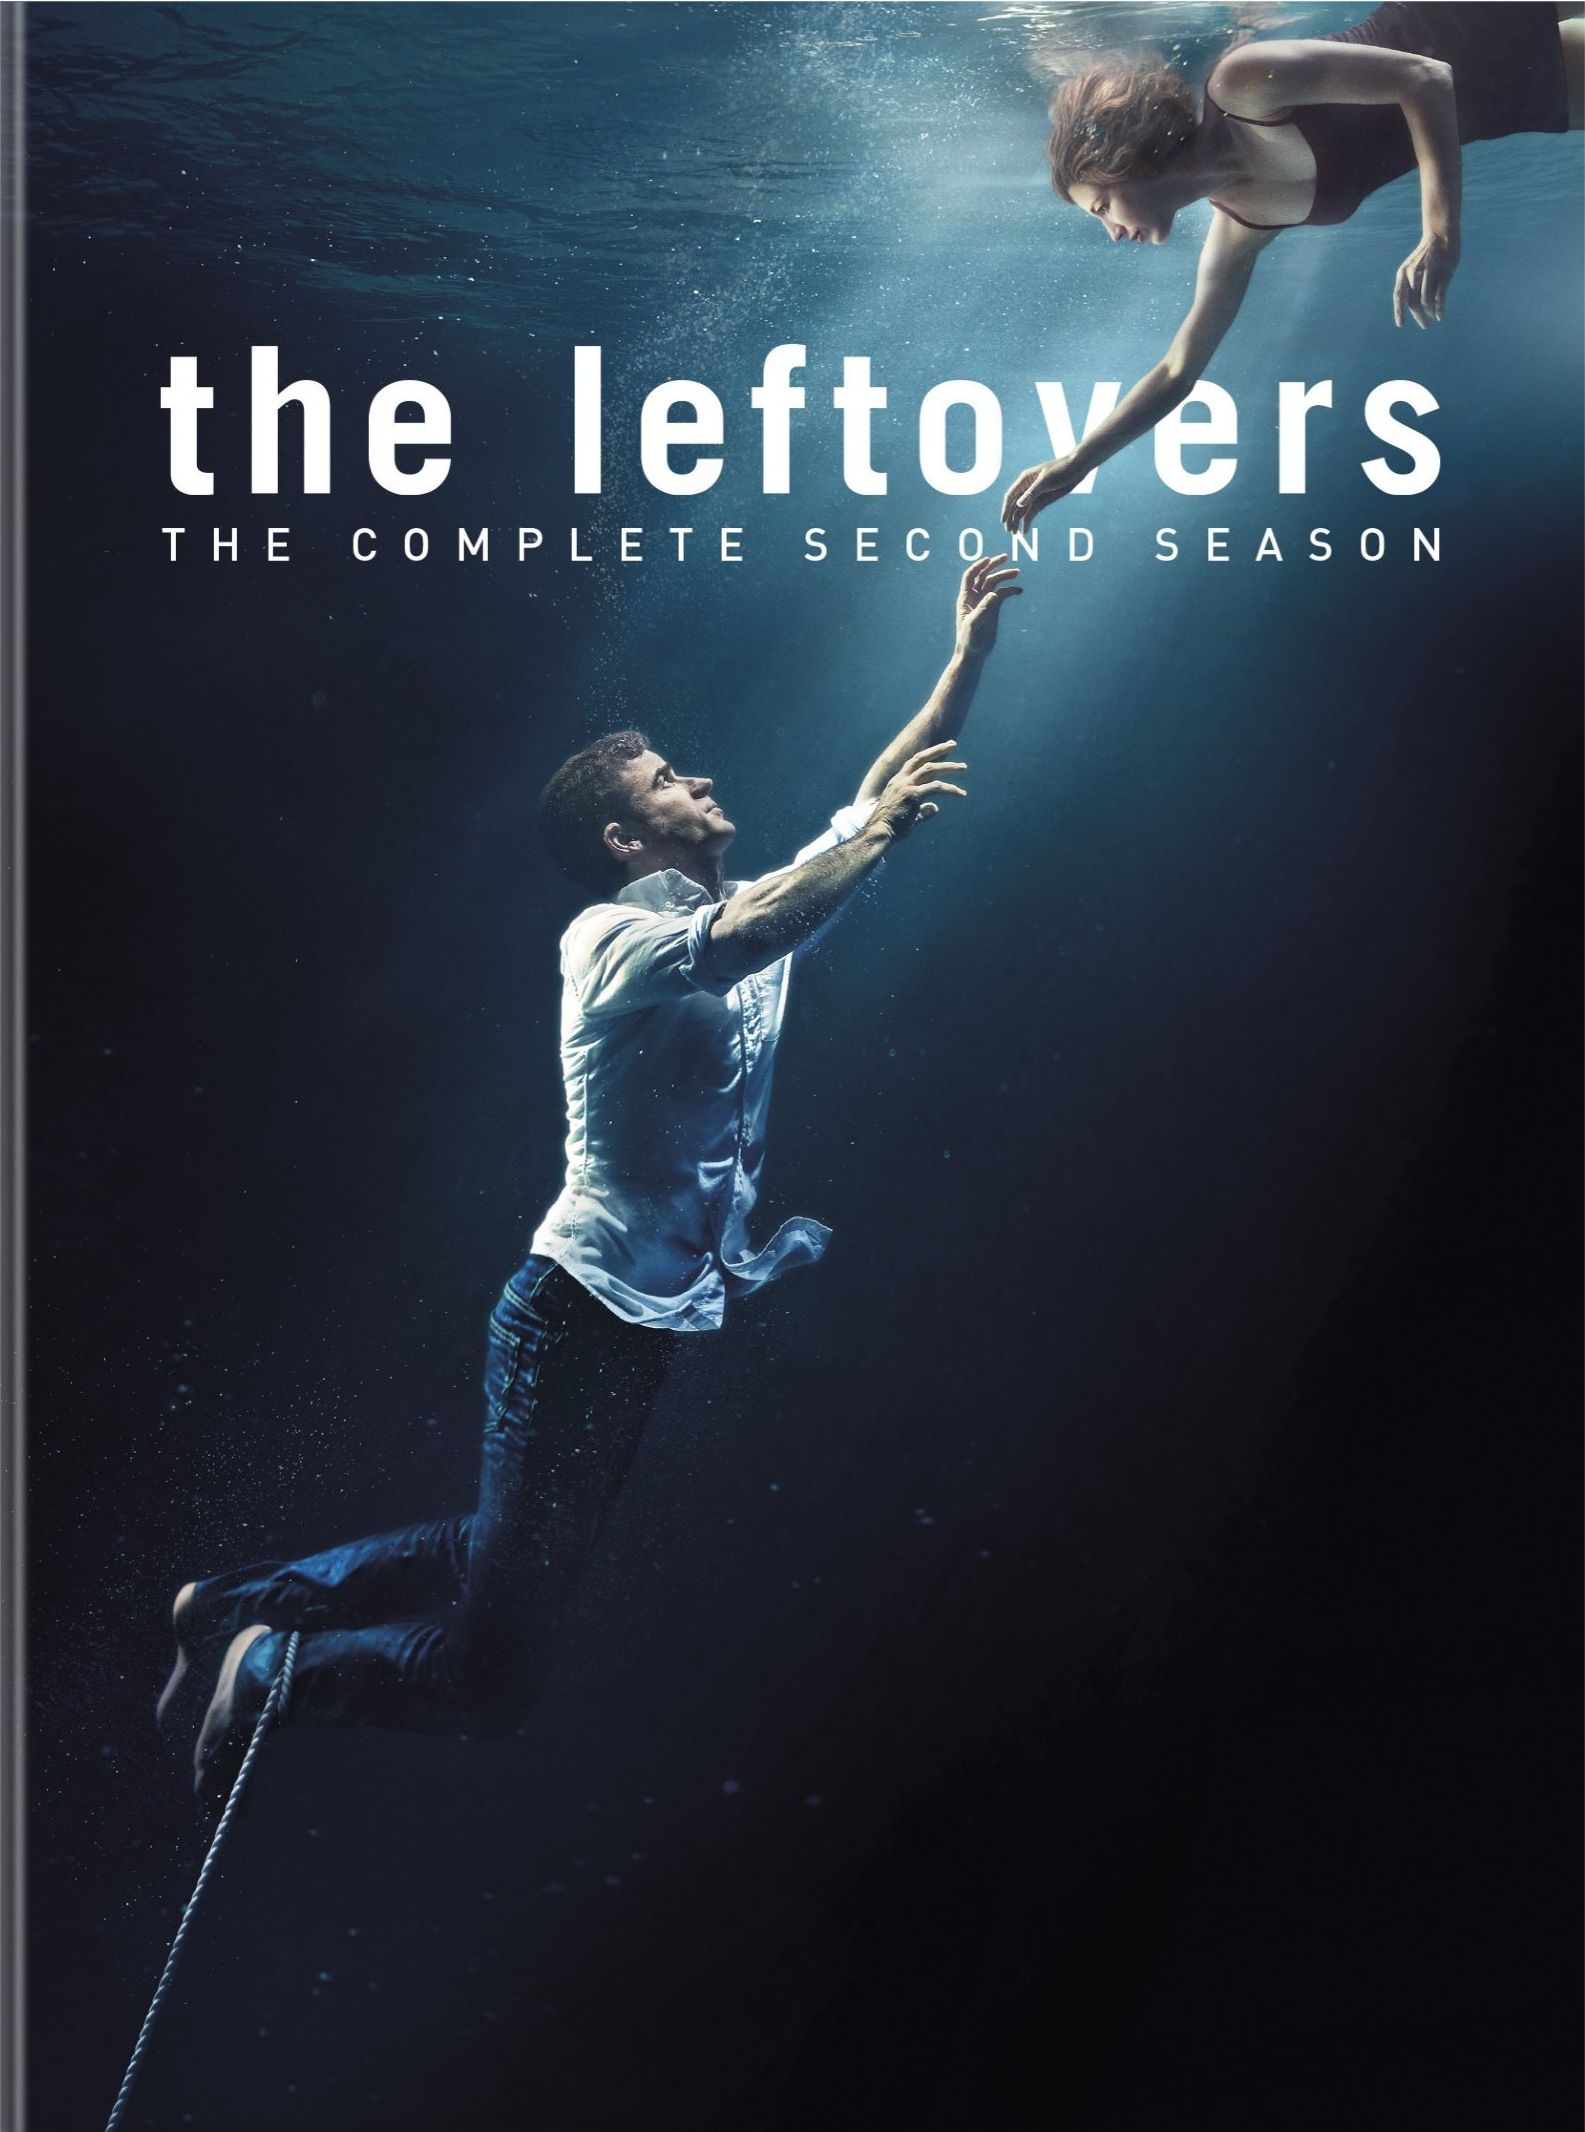 The Leftovers #3